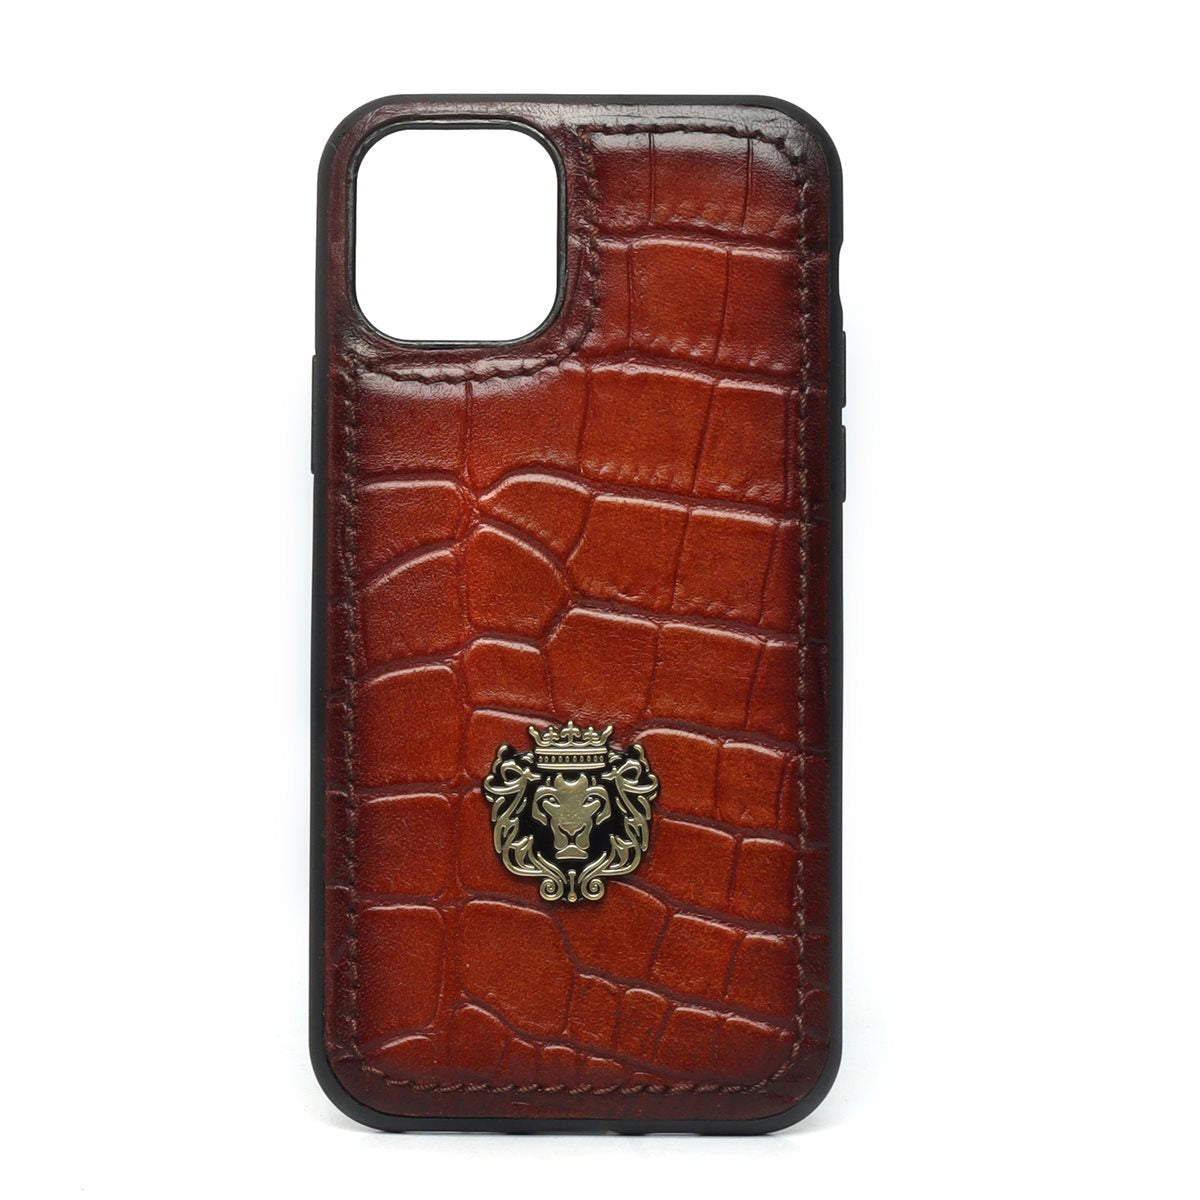 Tan Croco Print Leather Mobile Cover by Brune & Bareskin